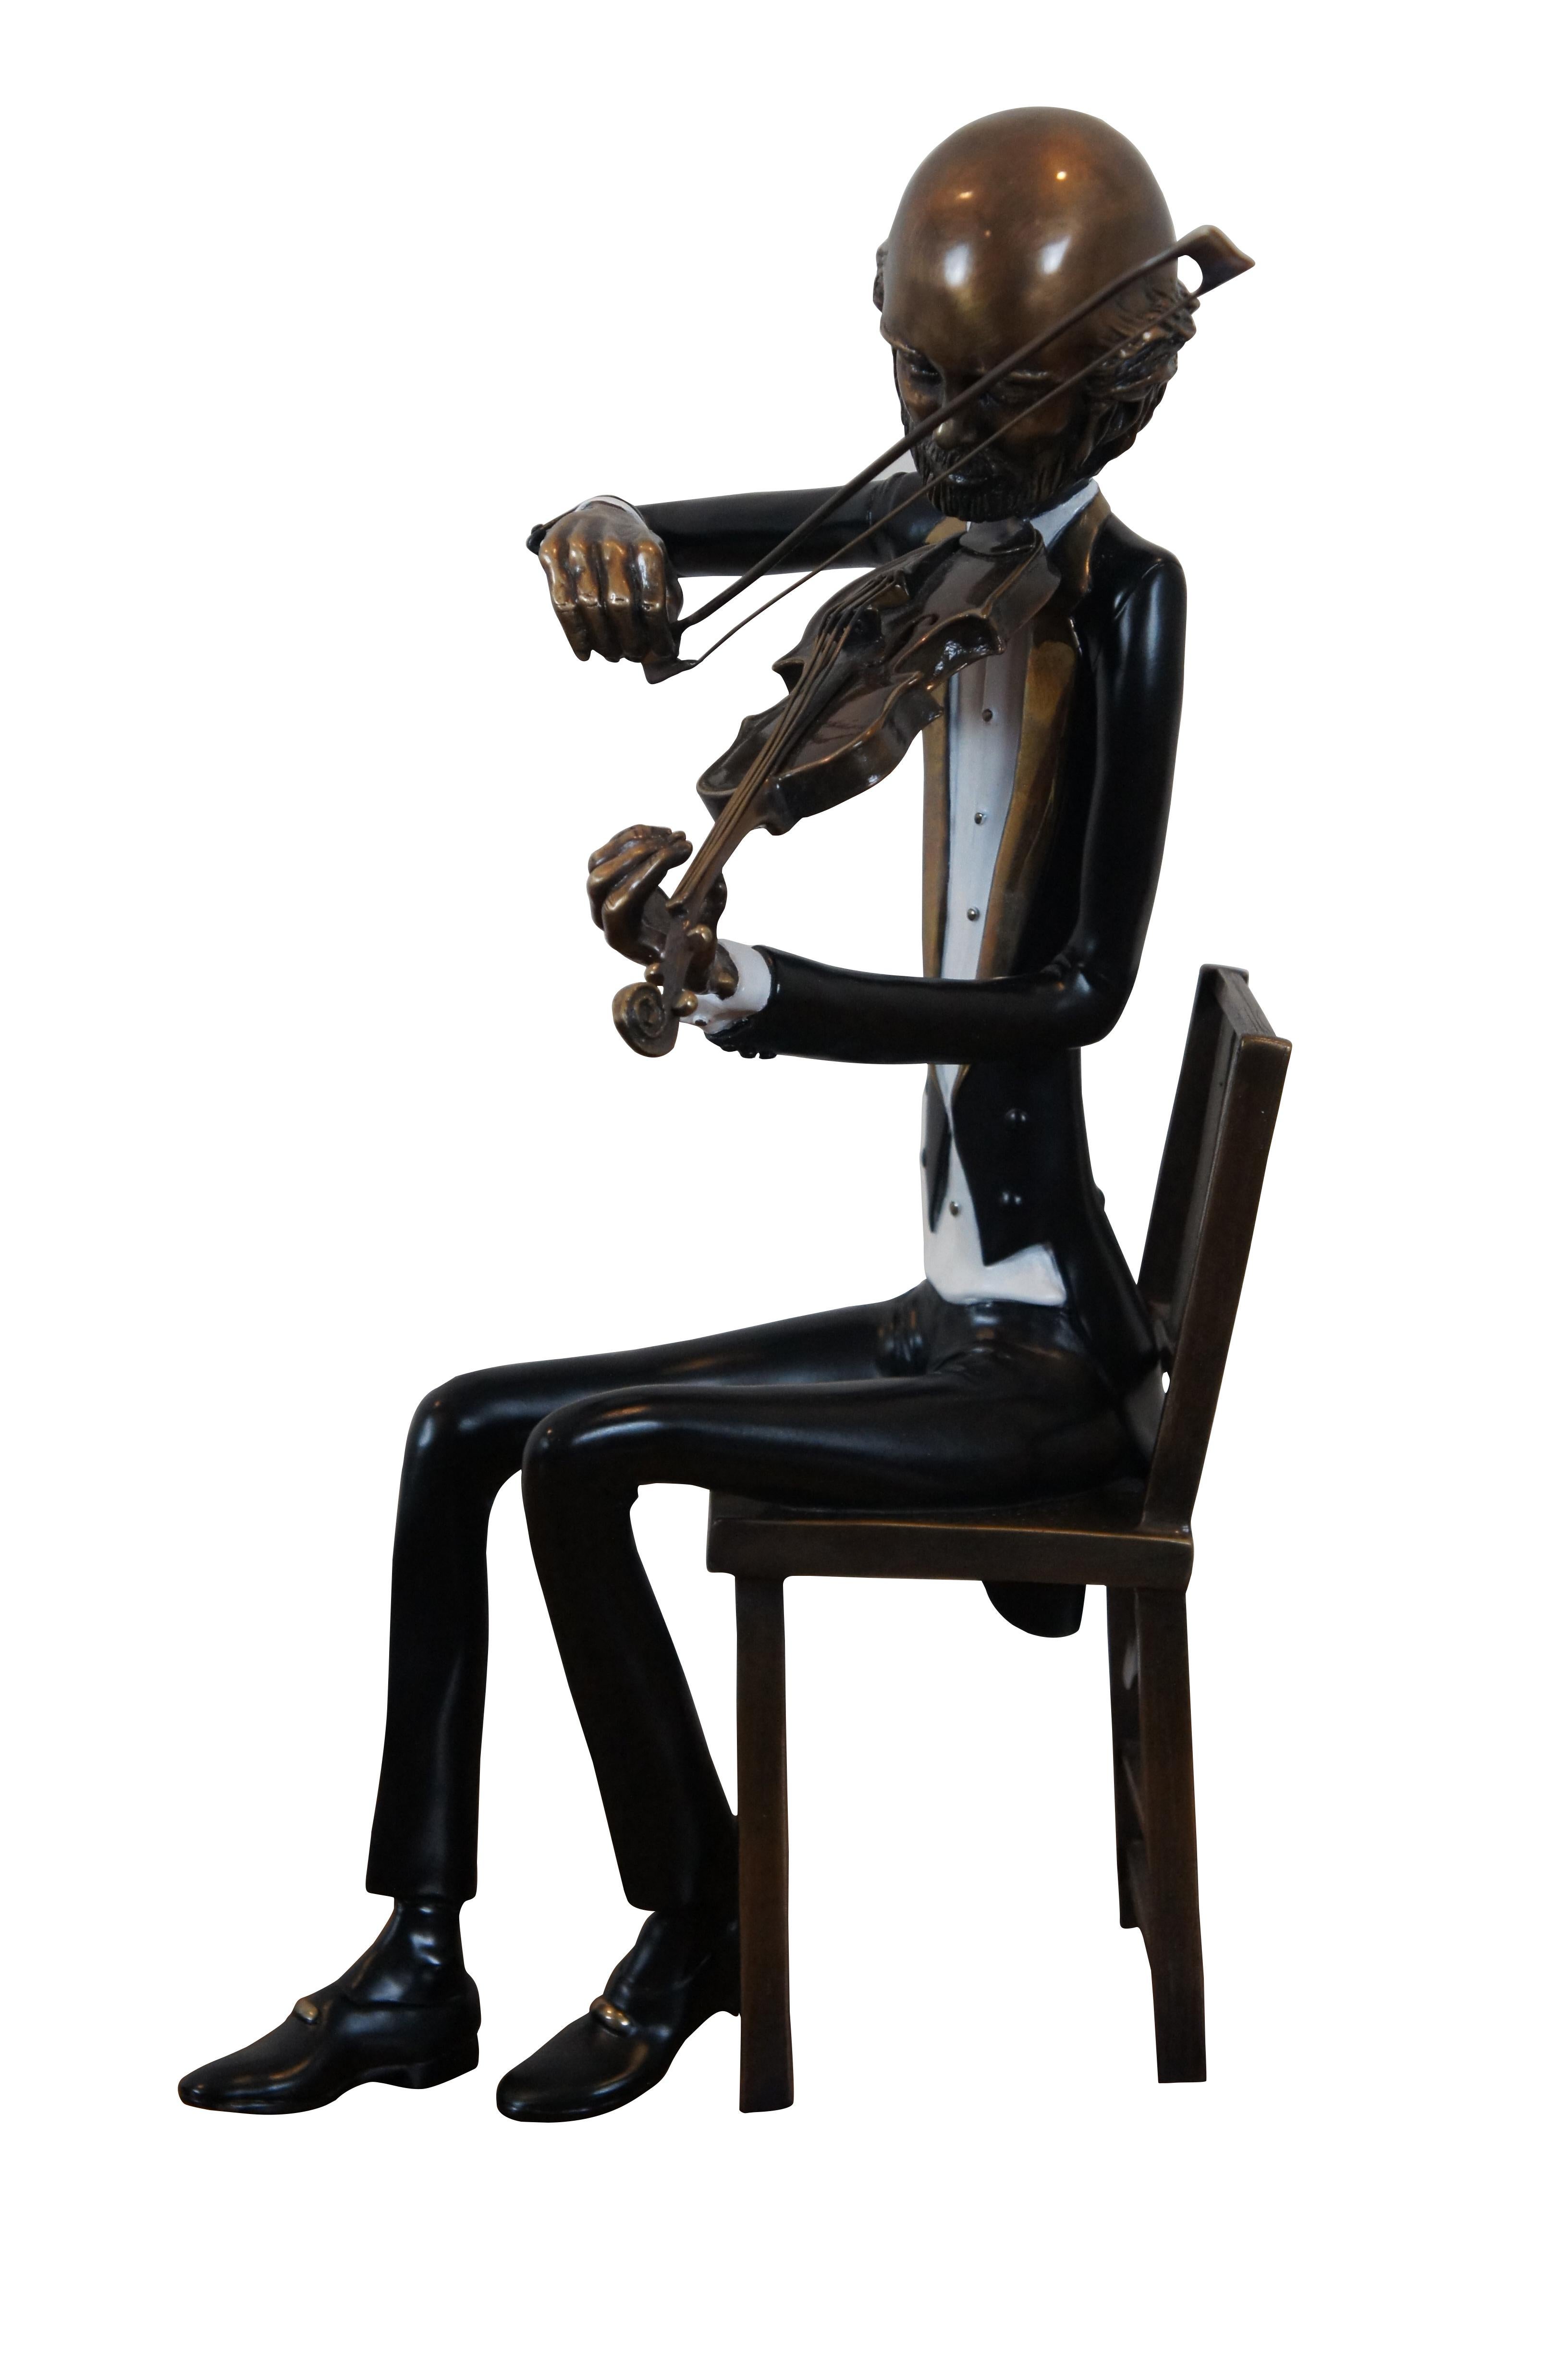 Modernist bronze figurine/statuette titled First Violin from the Symphony Collection by Ron and Sheila Ruiz. Signed and numbered 42/80 on coat tail.
“Both natives of Southern California, when Ron and Sheila married in 1984, they found they shared